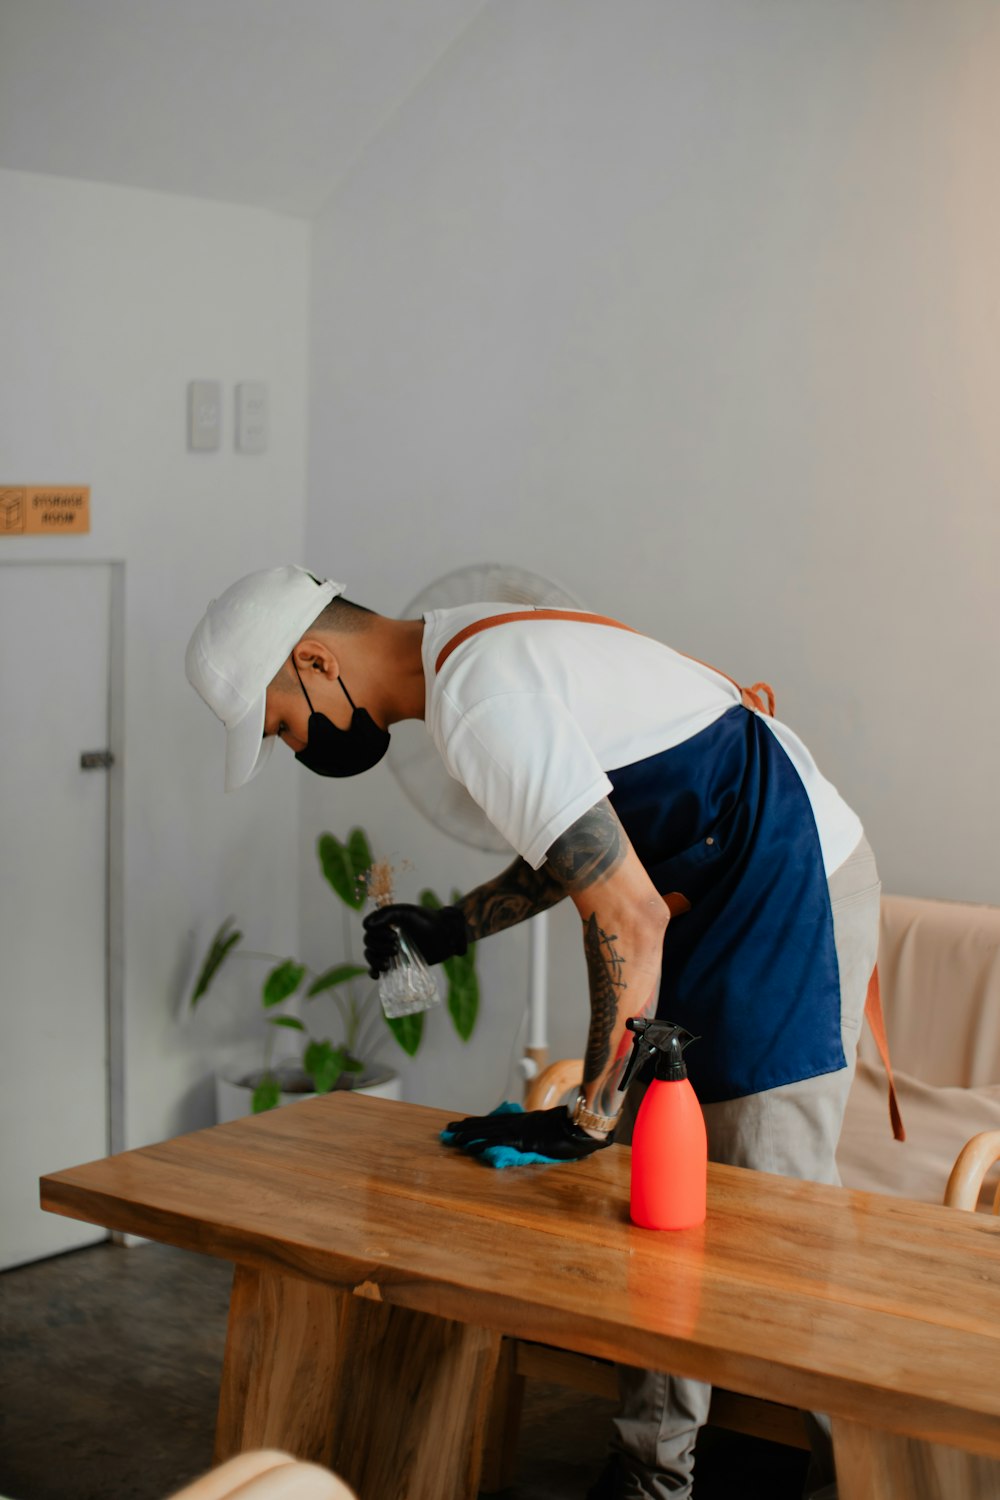 a man in an apron is sanding a wooden table